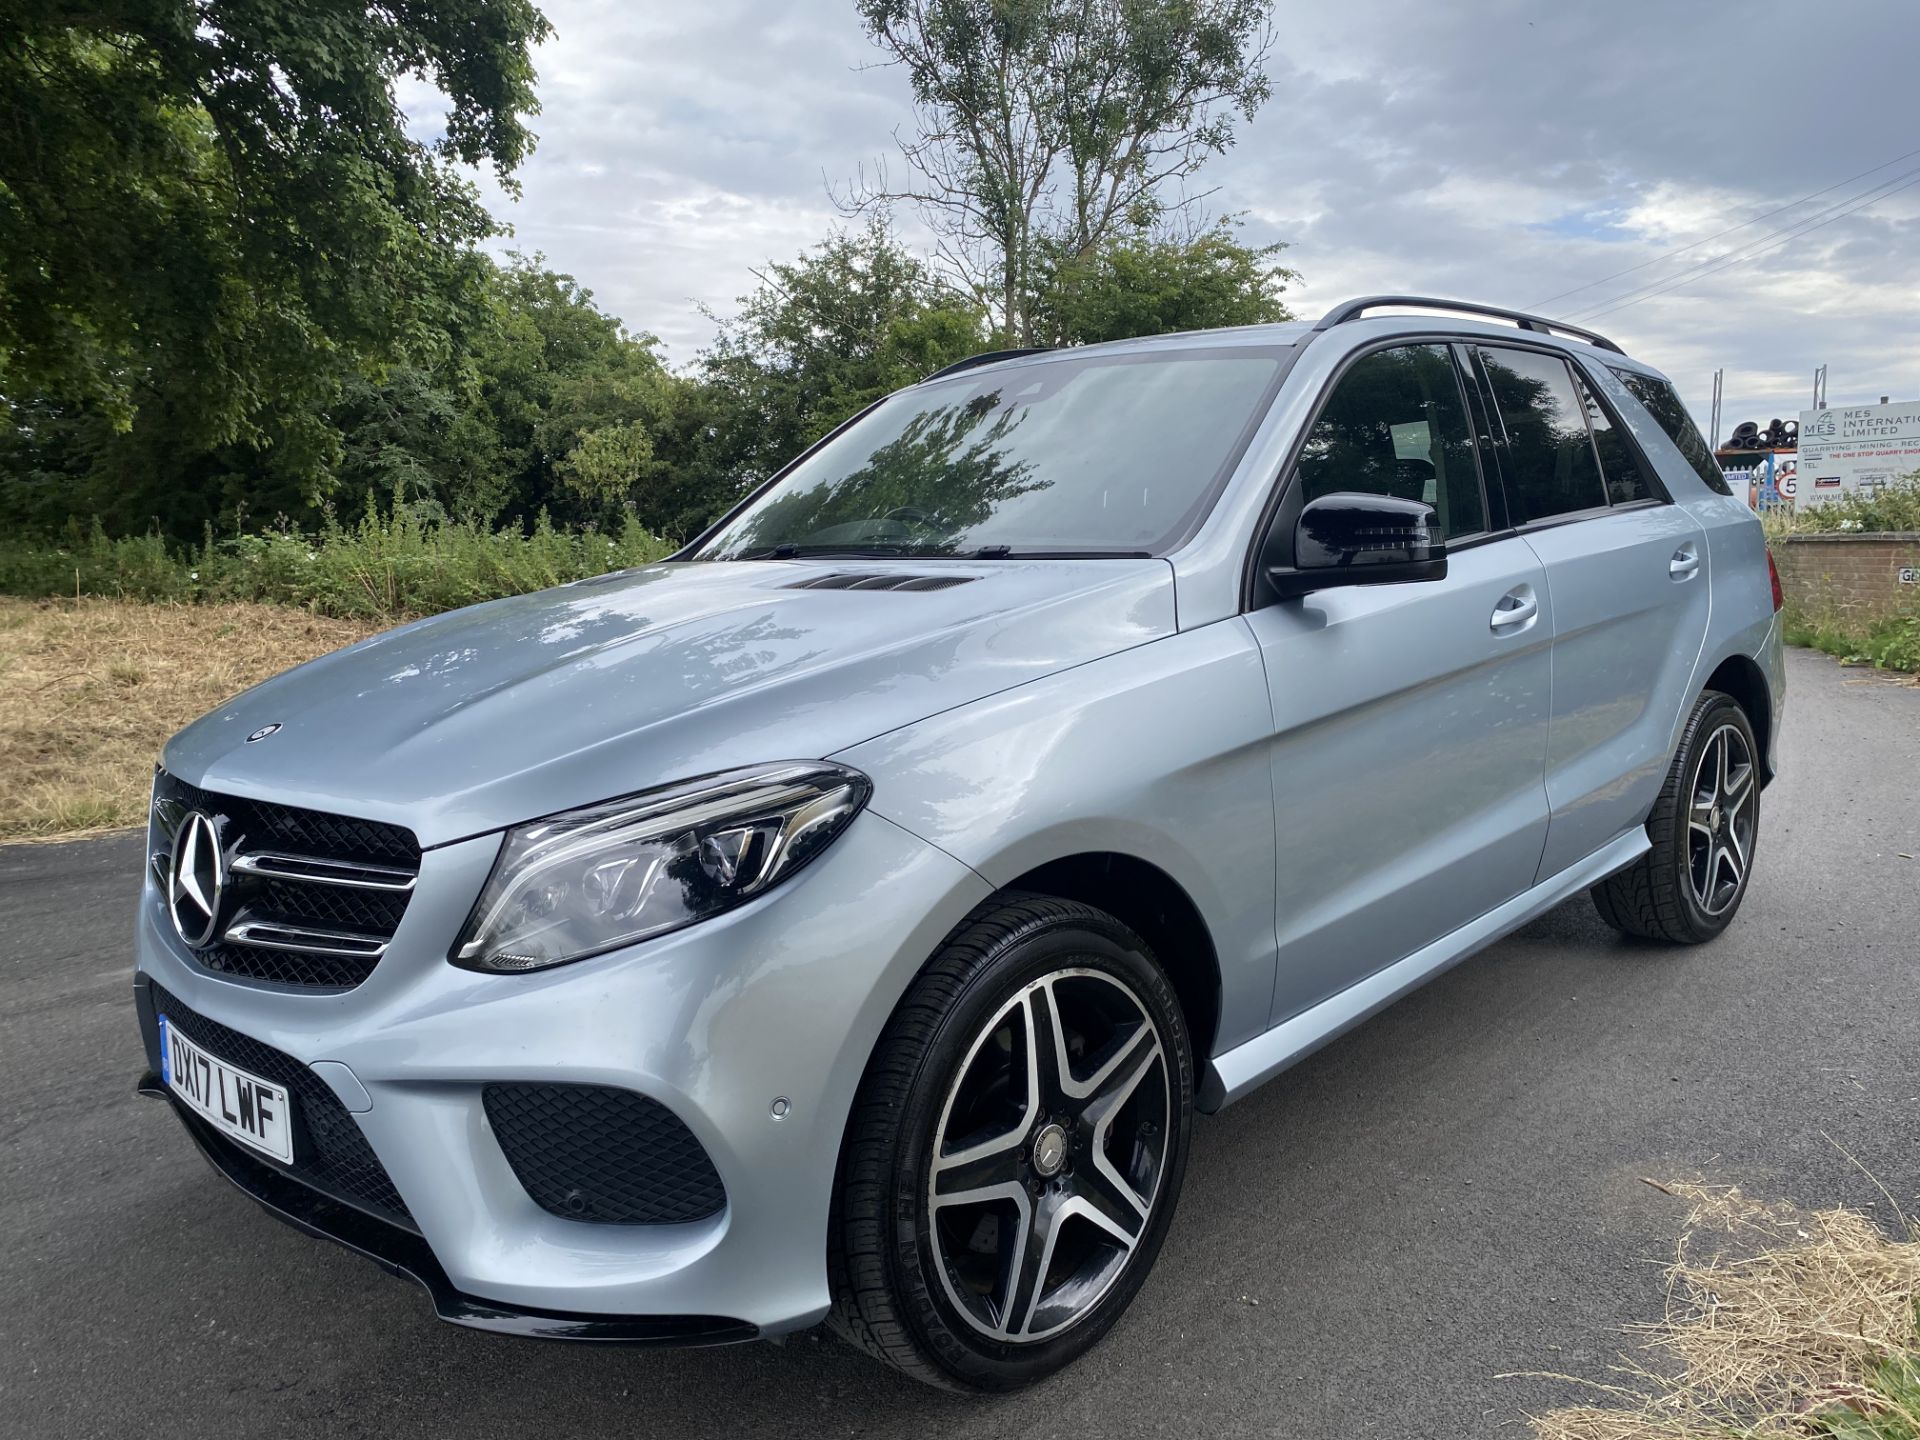 MERCEDES GLE 250d "AMG LINE NIGHT EDITION" 4 MATIC 7G AUTO (17REG) GREAT SPEC *NO VAT - SAVE 20%" - Image 5 of 36